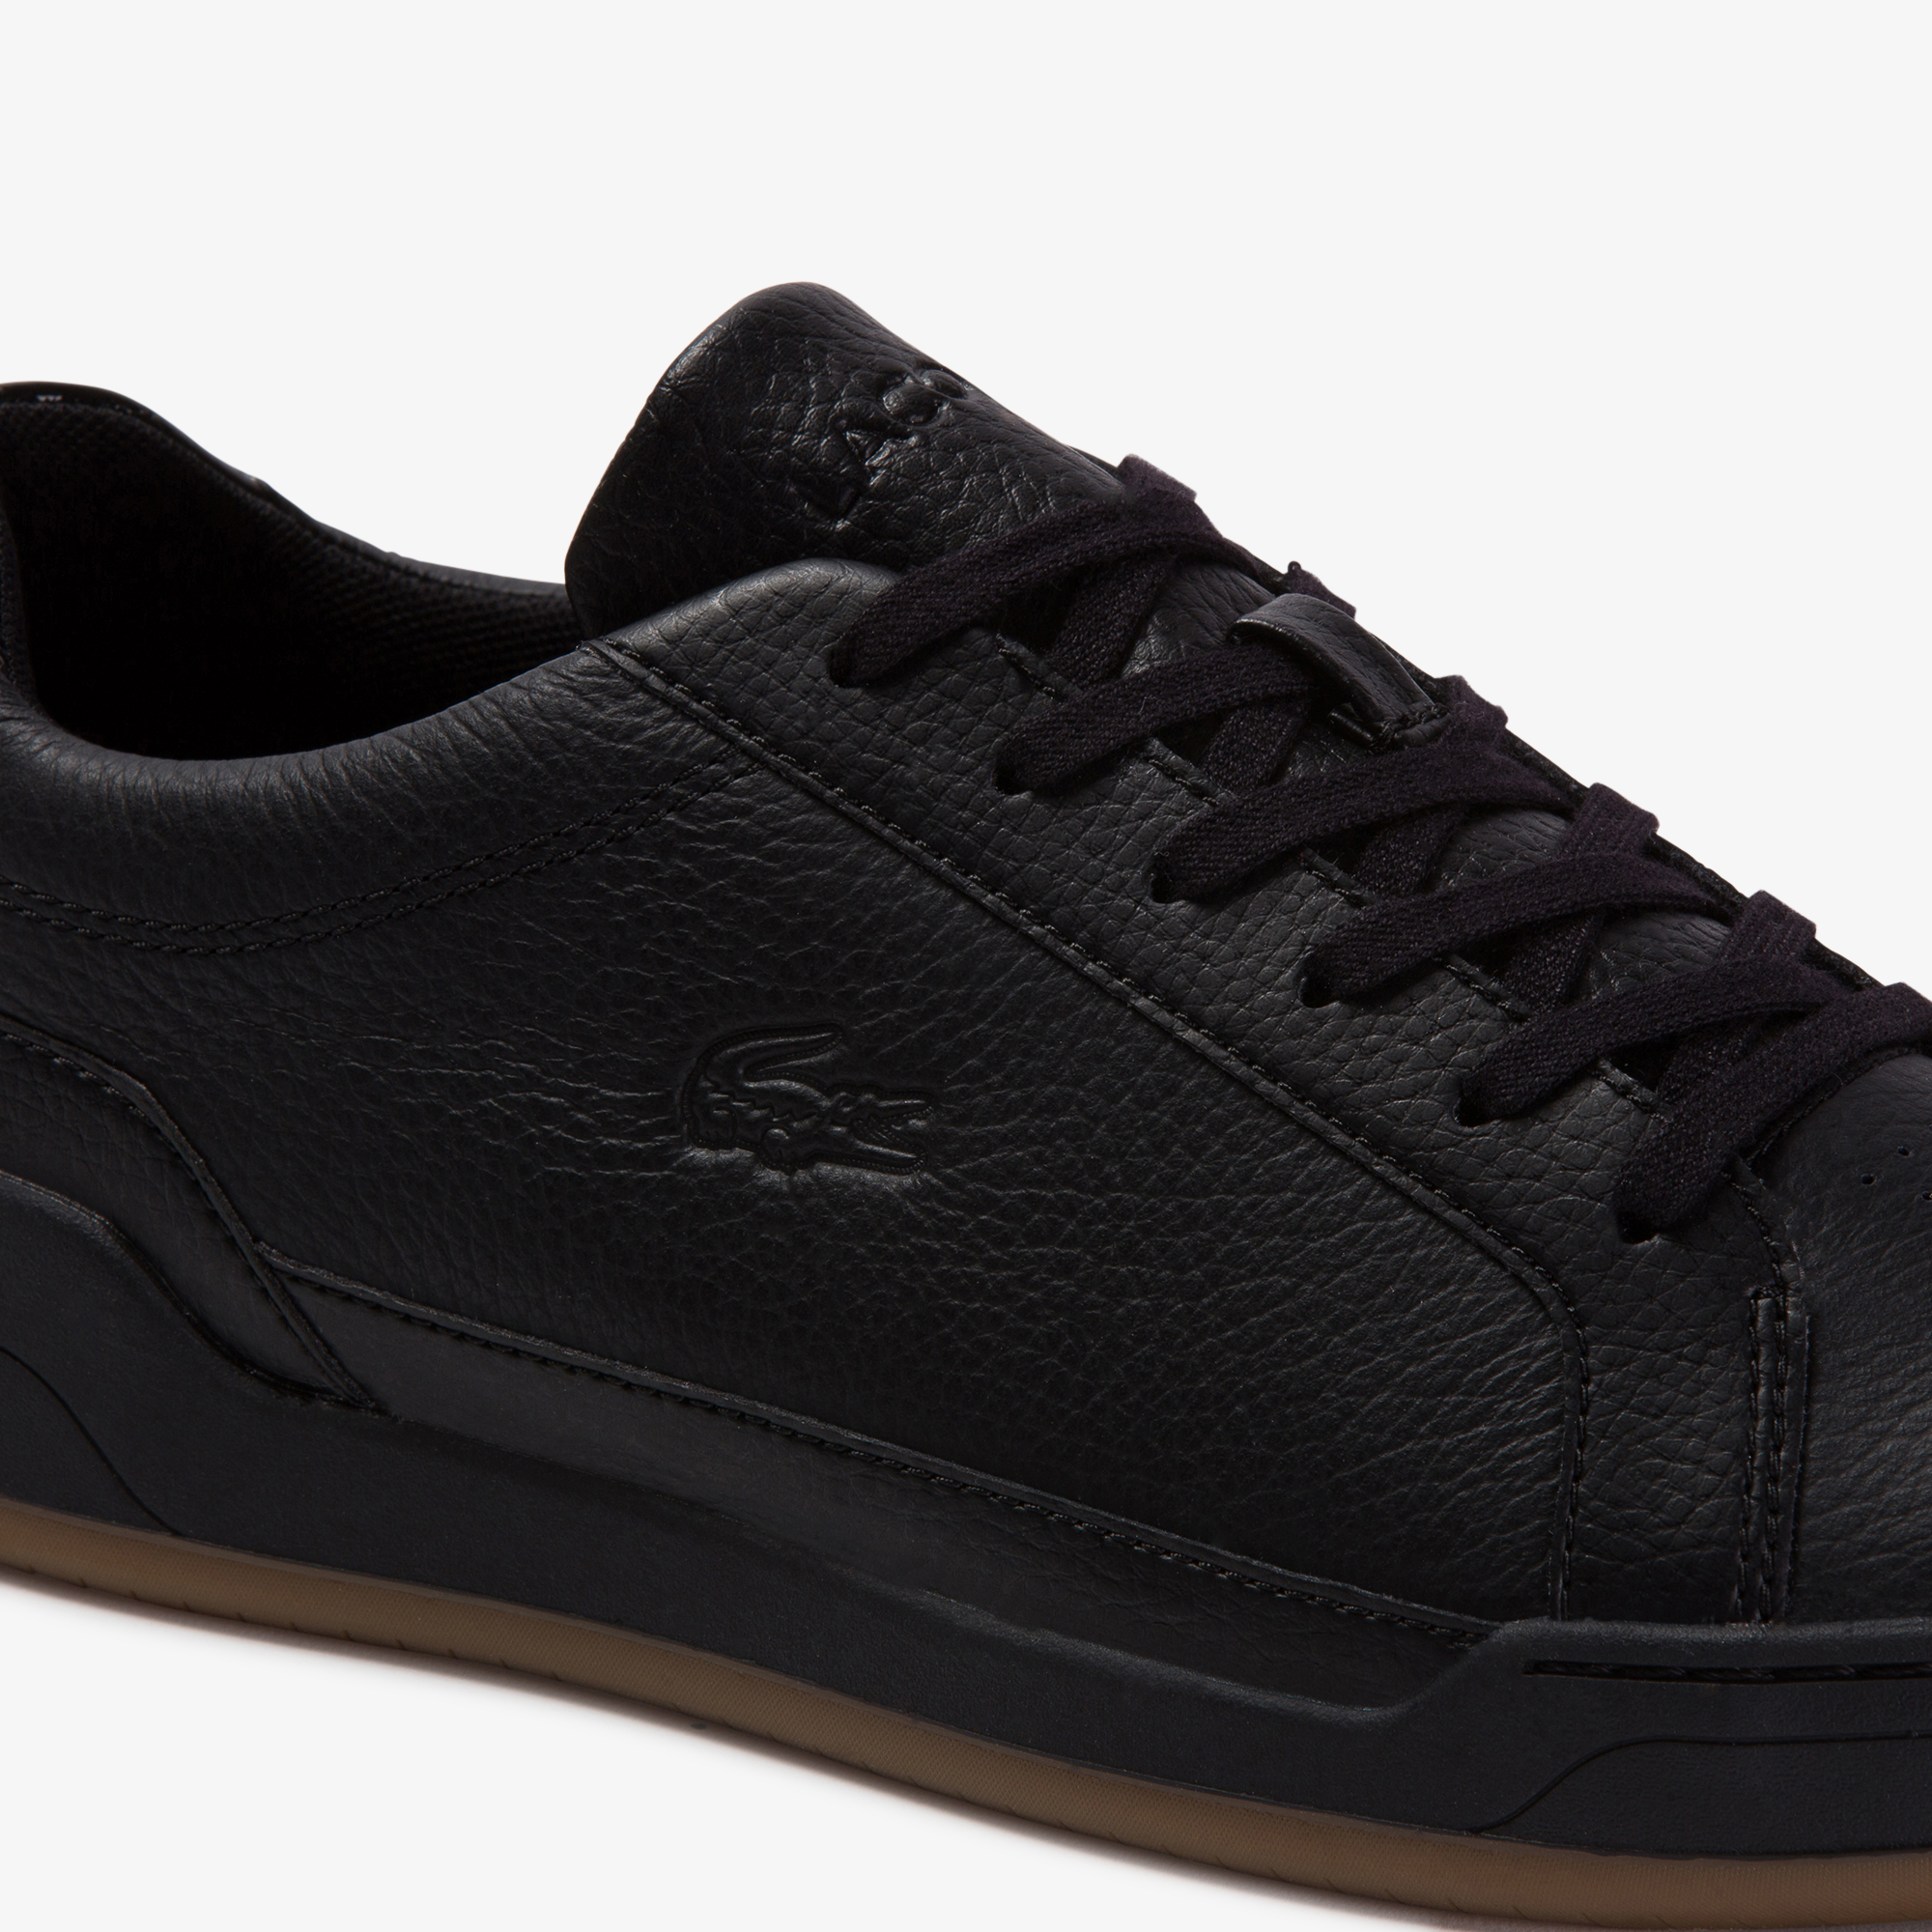 Lacoste Men's Challenge Tumbled Leather Sneakers 739SMA0017 